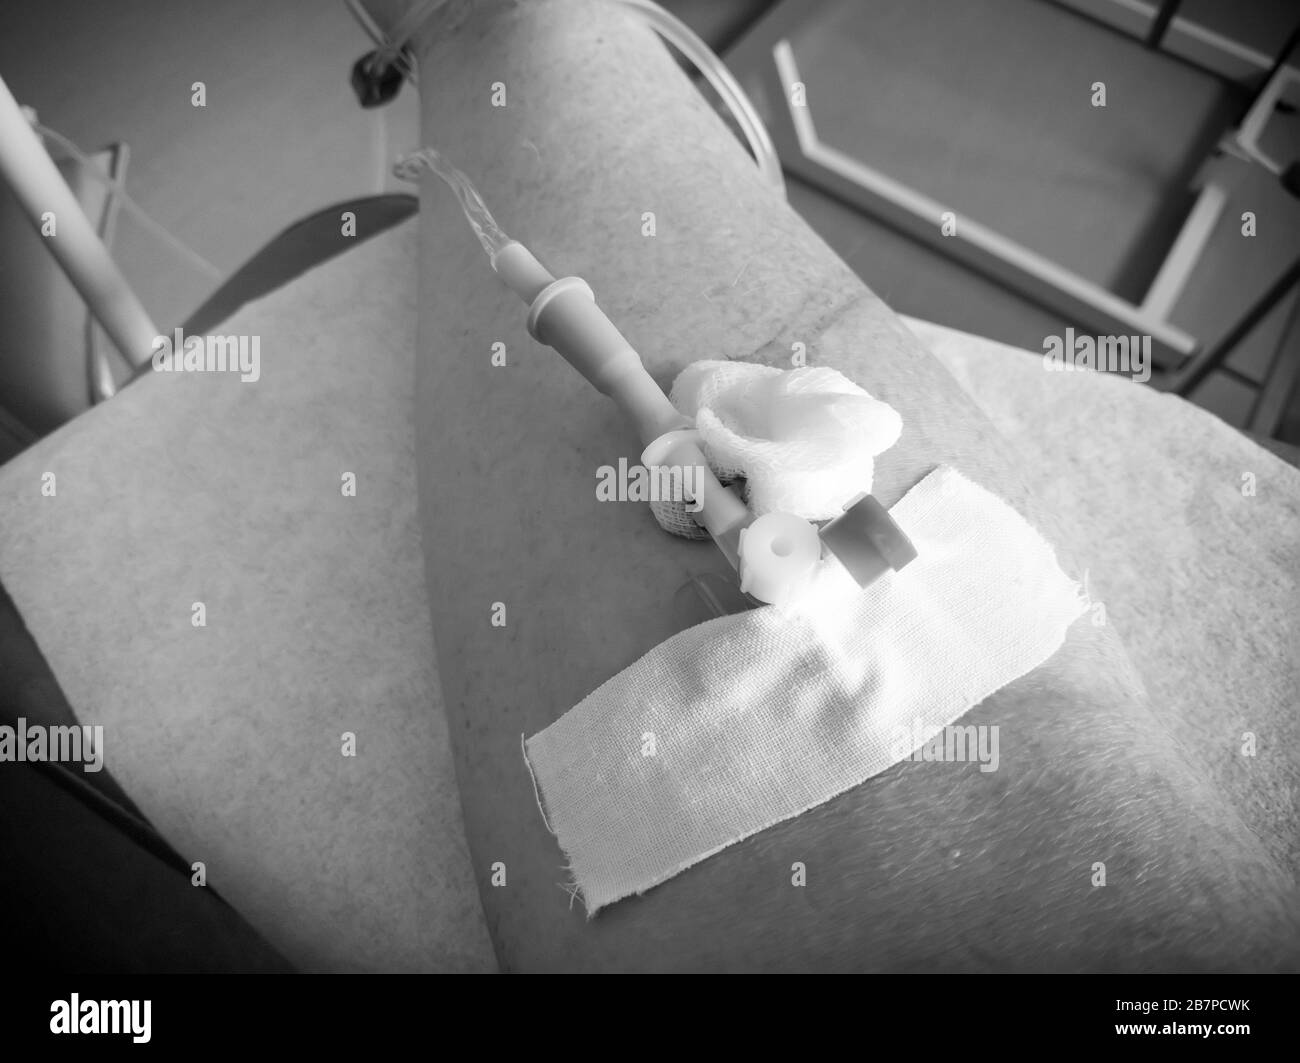 Intravenous catheter in the patient's hand. The introduction of drugs for various diseases. Black and white image. Photo with vignetting Stock Photo